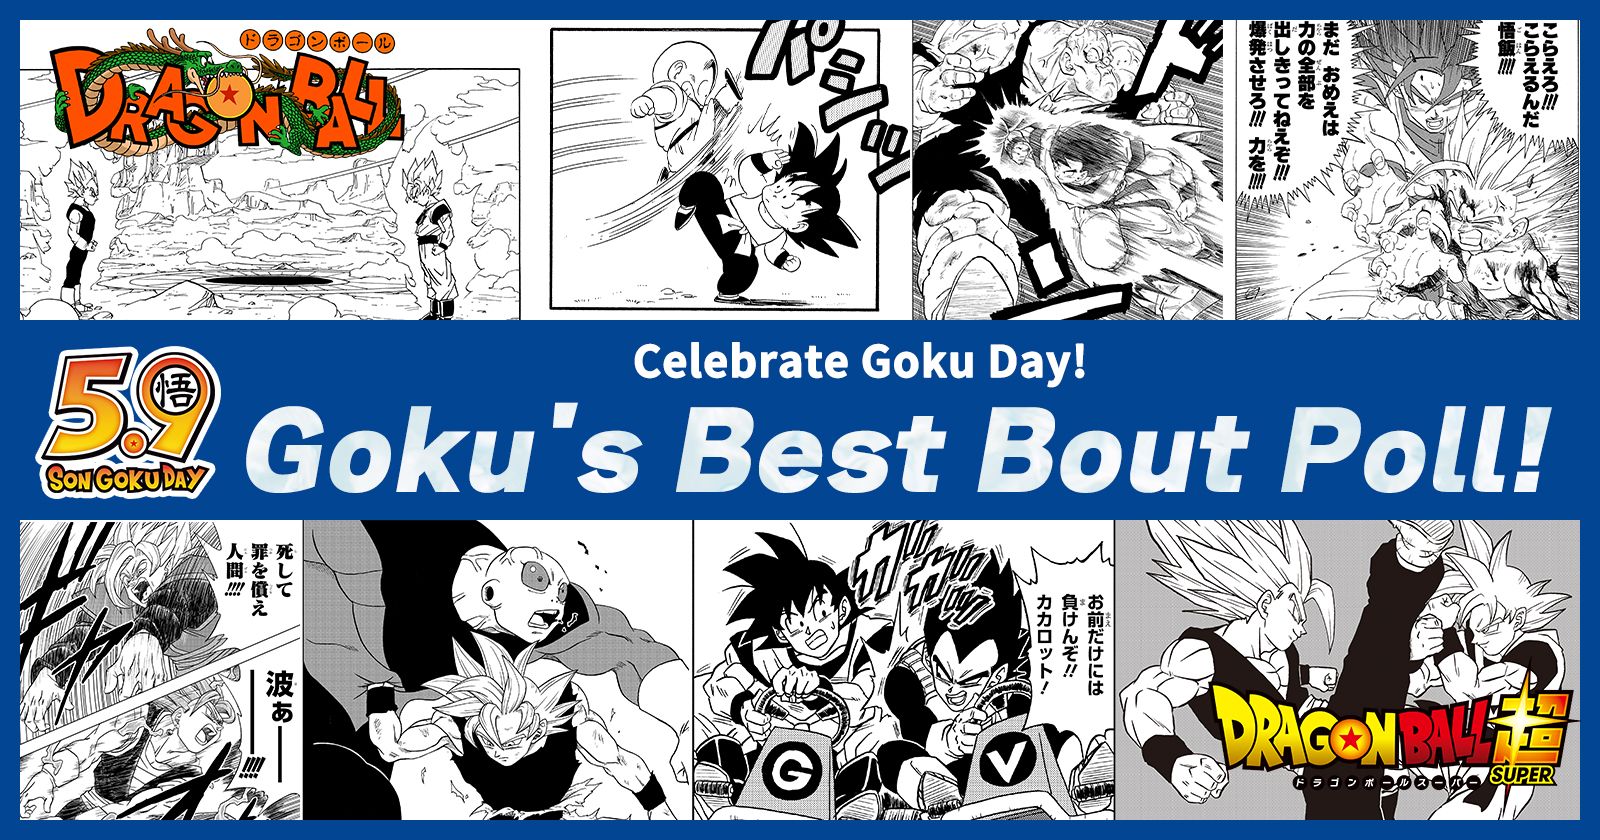 Goku Day Celebration Event "Goku's Best Bout Poll" Is Here! The First Place Fight Will Be Made Into Merchandise!